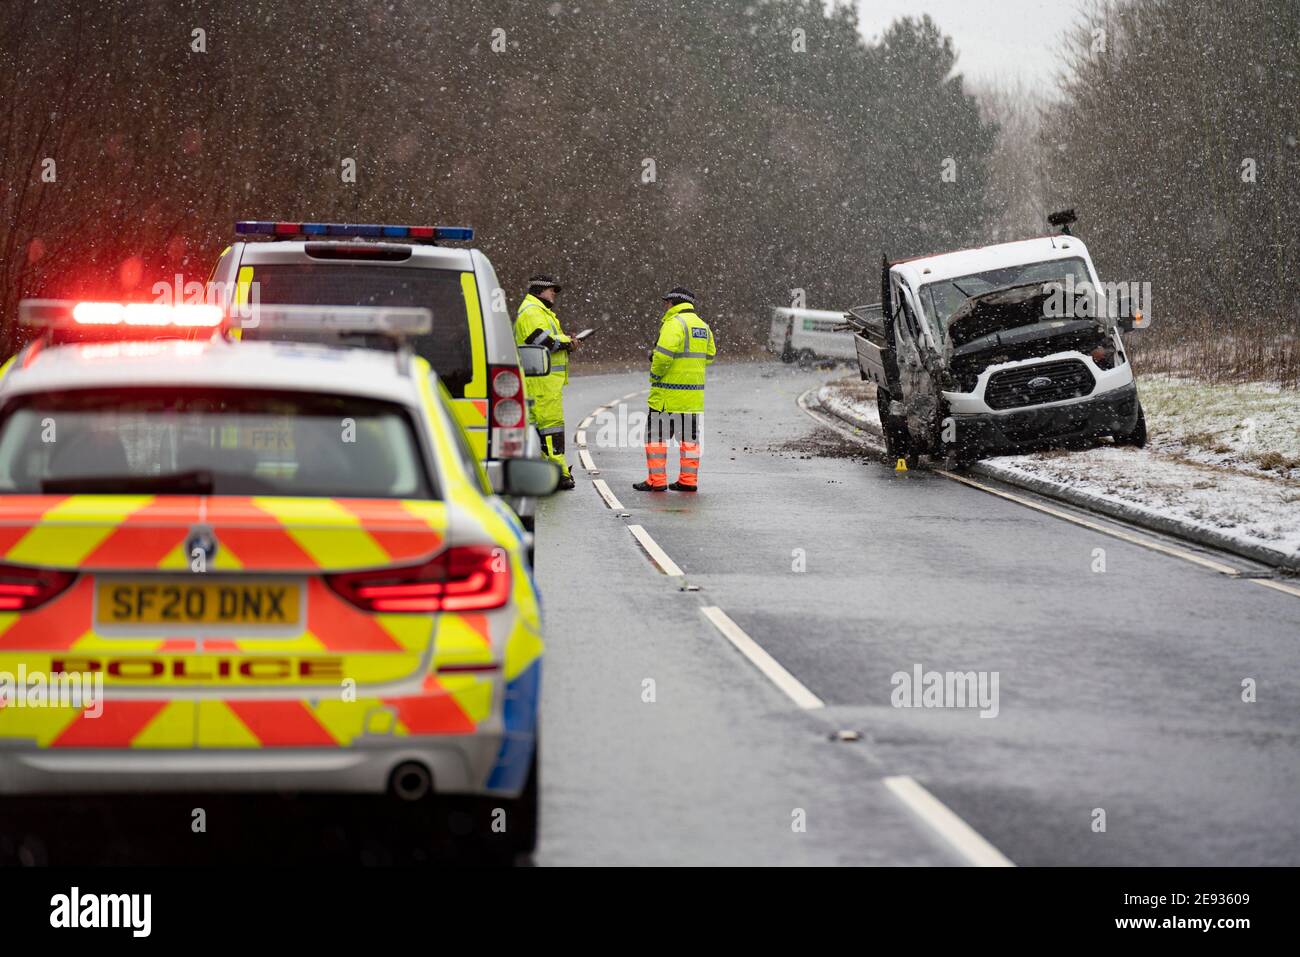 EXCLUSIVE Birkhill, Scotland, UK. 2 February 2021. Police accident investigation officers attend scene of serious multiple vehicle traffic accident on A68 at Birkhill north of Earlston in Scottish Borders.  The A68. Remains closed in both directions at Lauder and Earlston. Iain Masterton/Alamy Live News Stock Photo